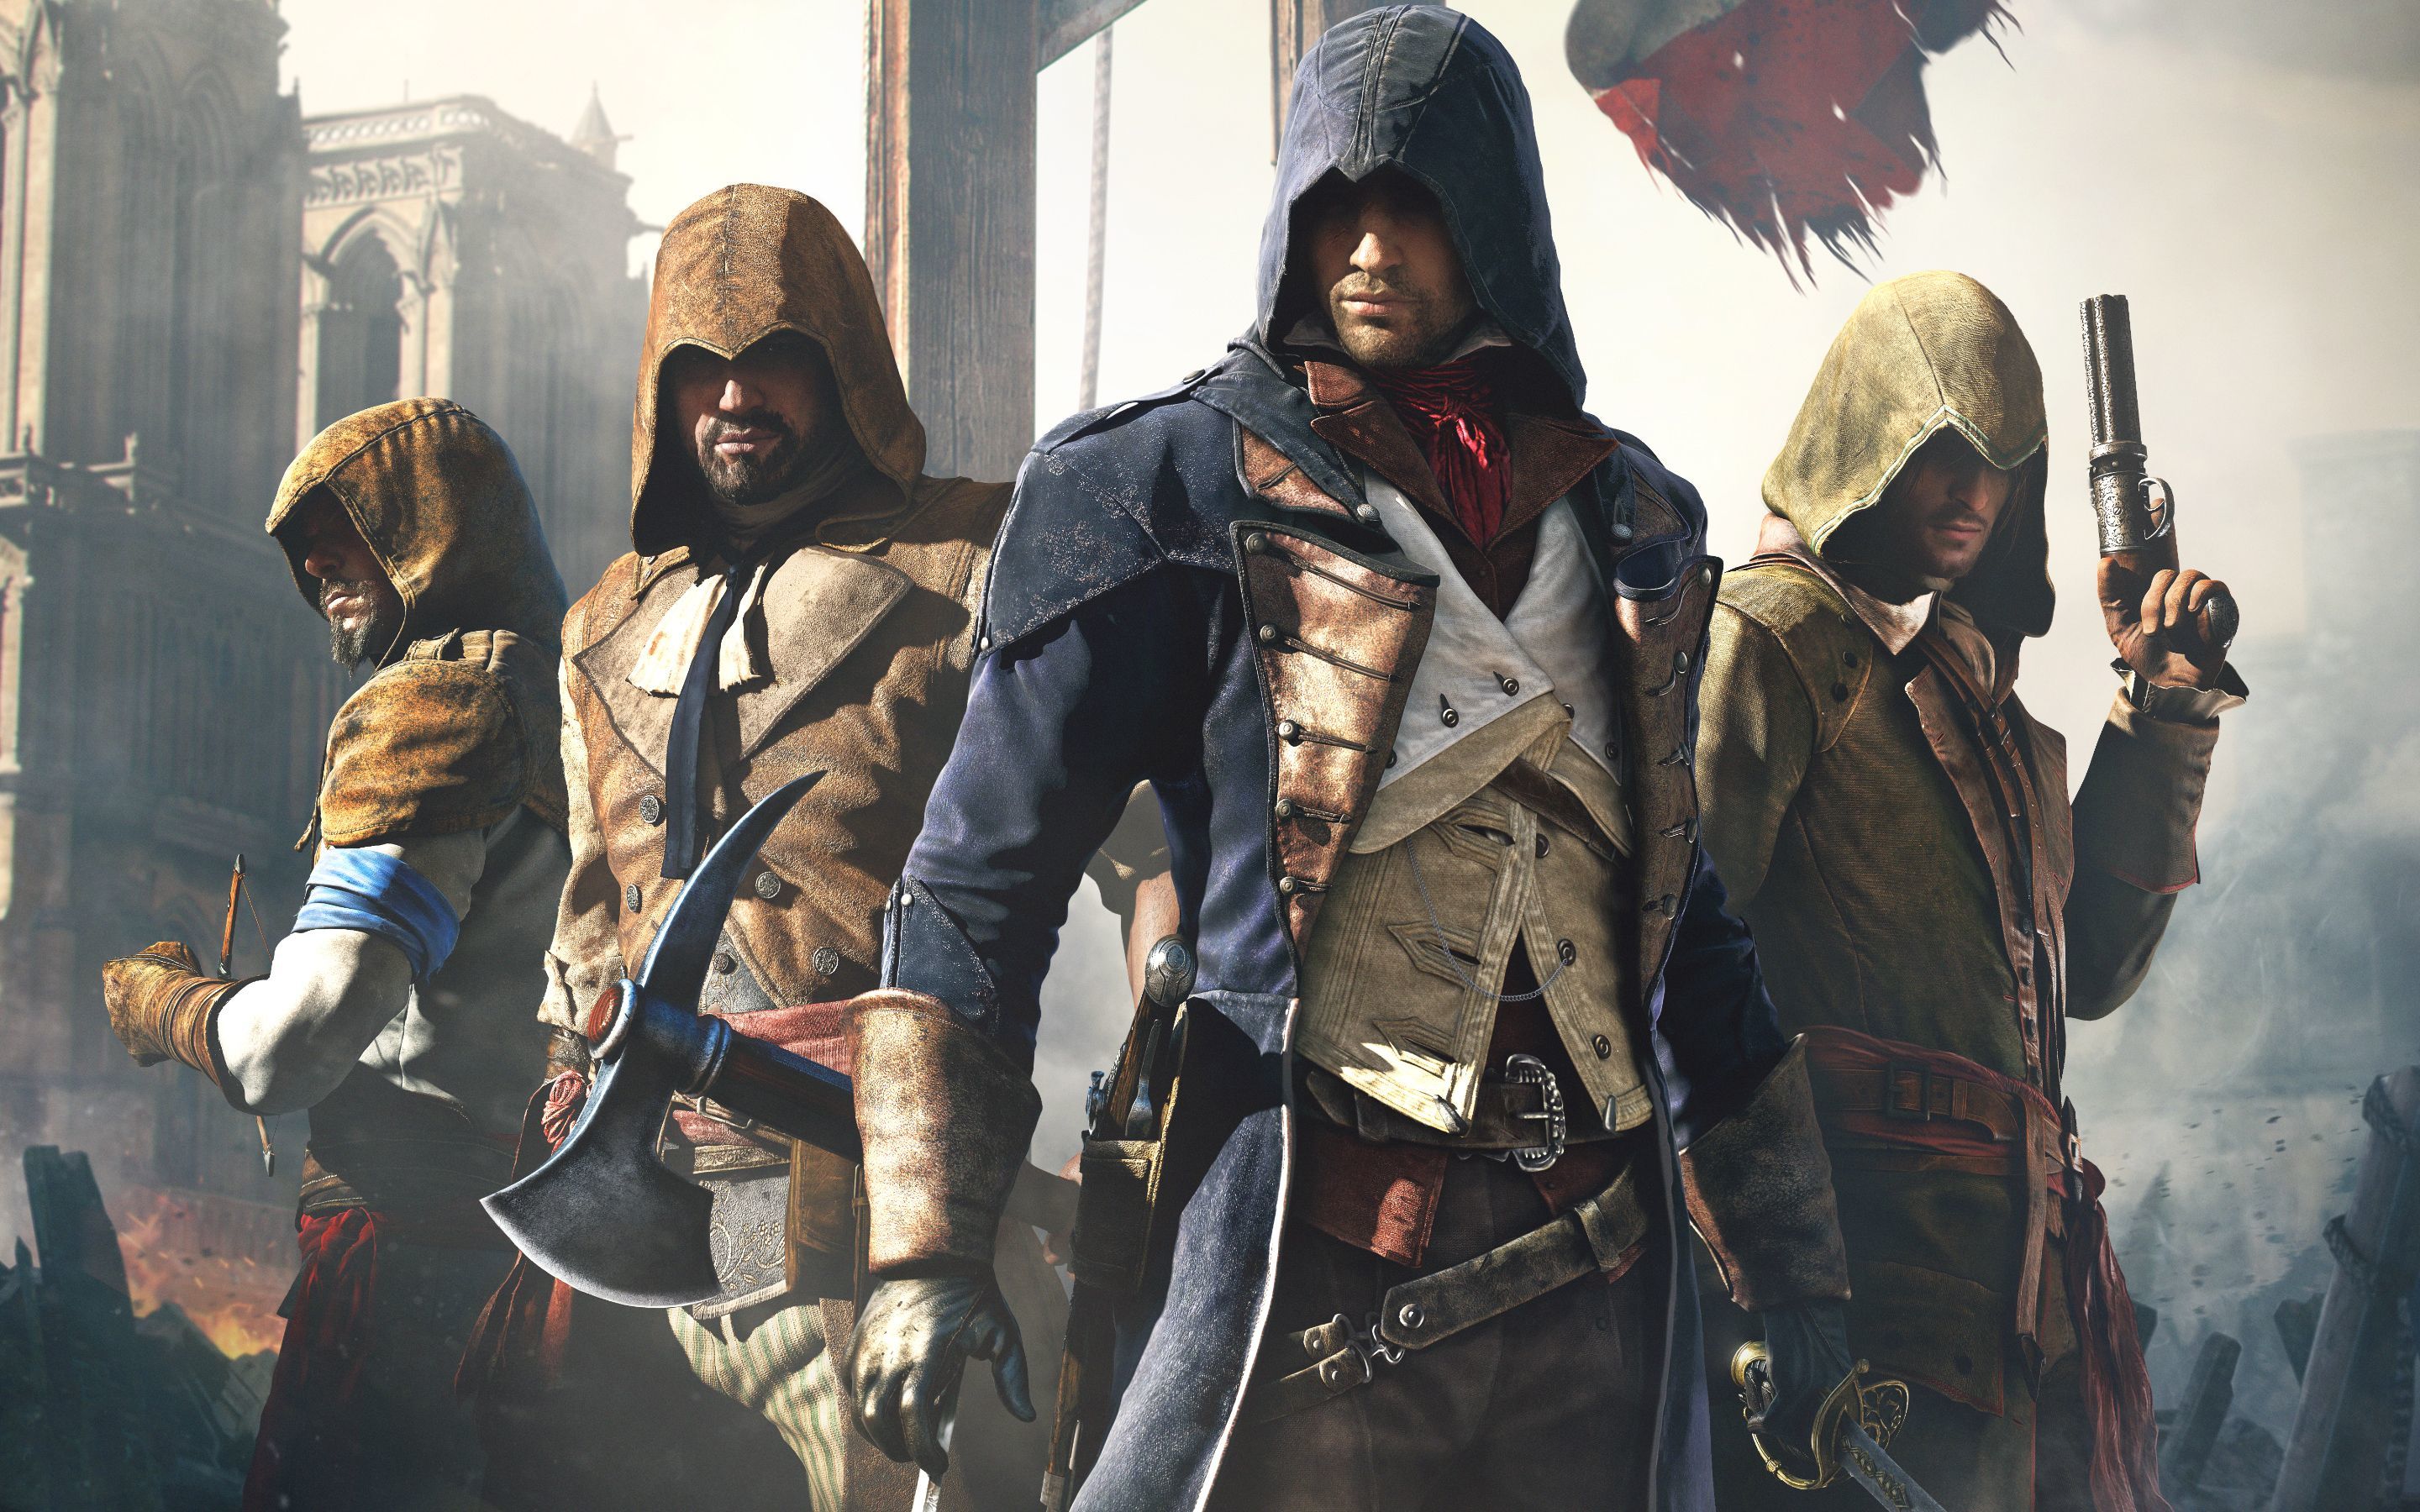 assassin's creed wallpaper,games,screenshot,pc game,fictional character,adventure game